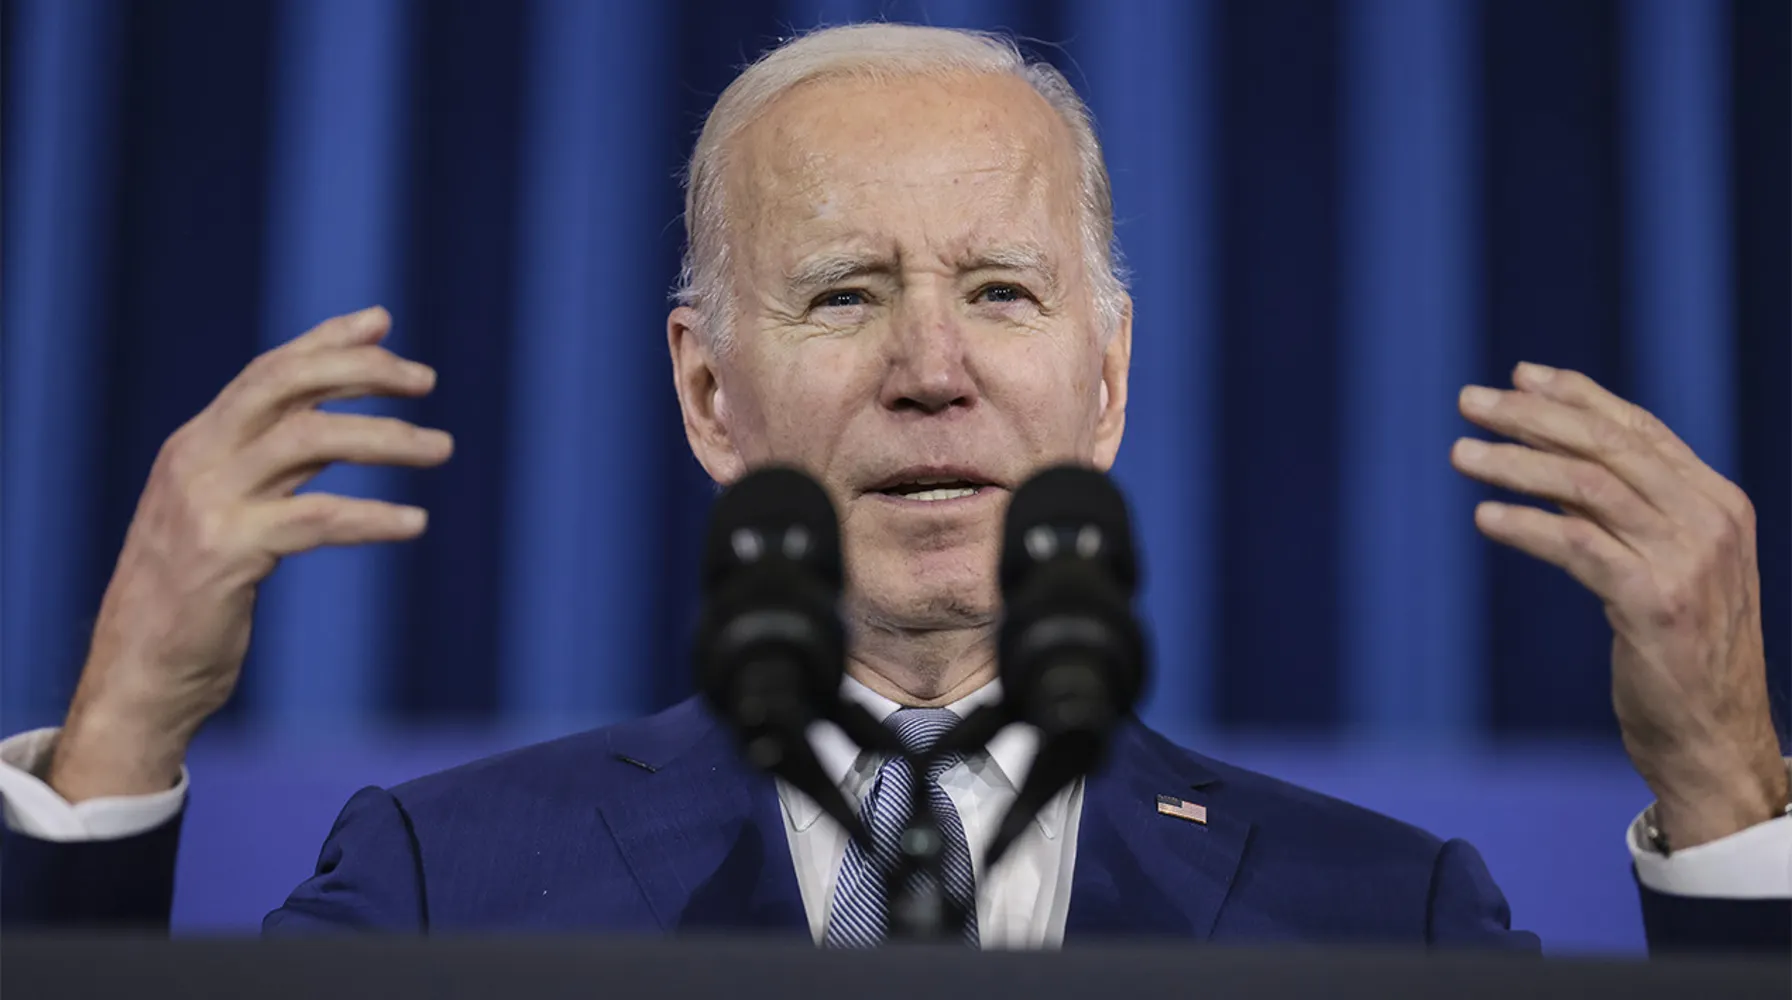 After a “severe” terrorist warning, Biden insisted on going to Northern Ireland, saying, “Can’t keep me out.”